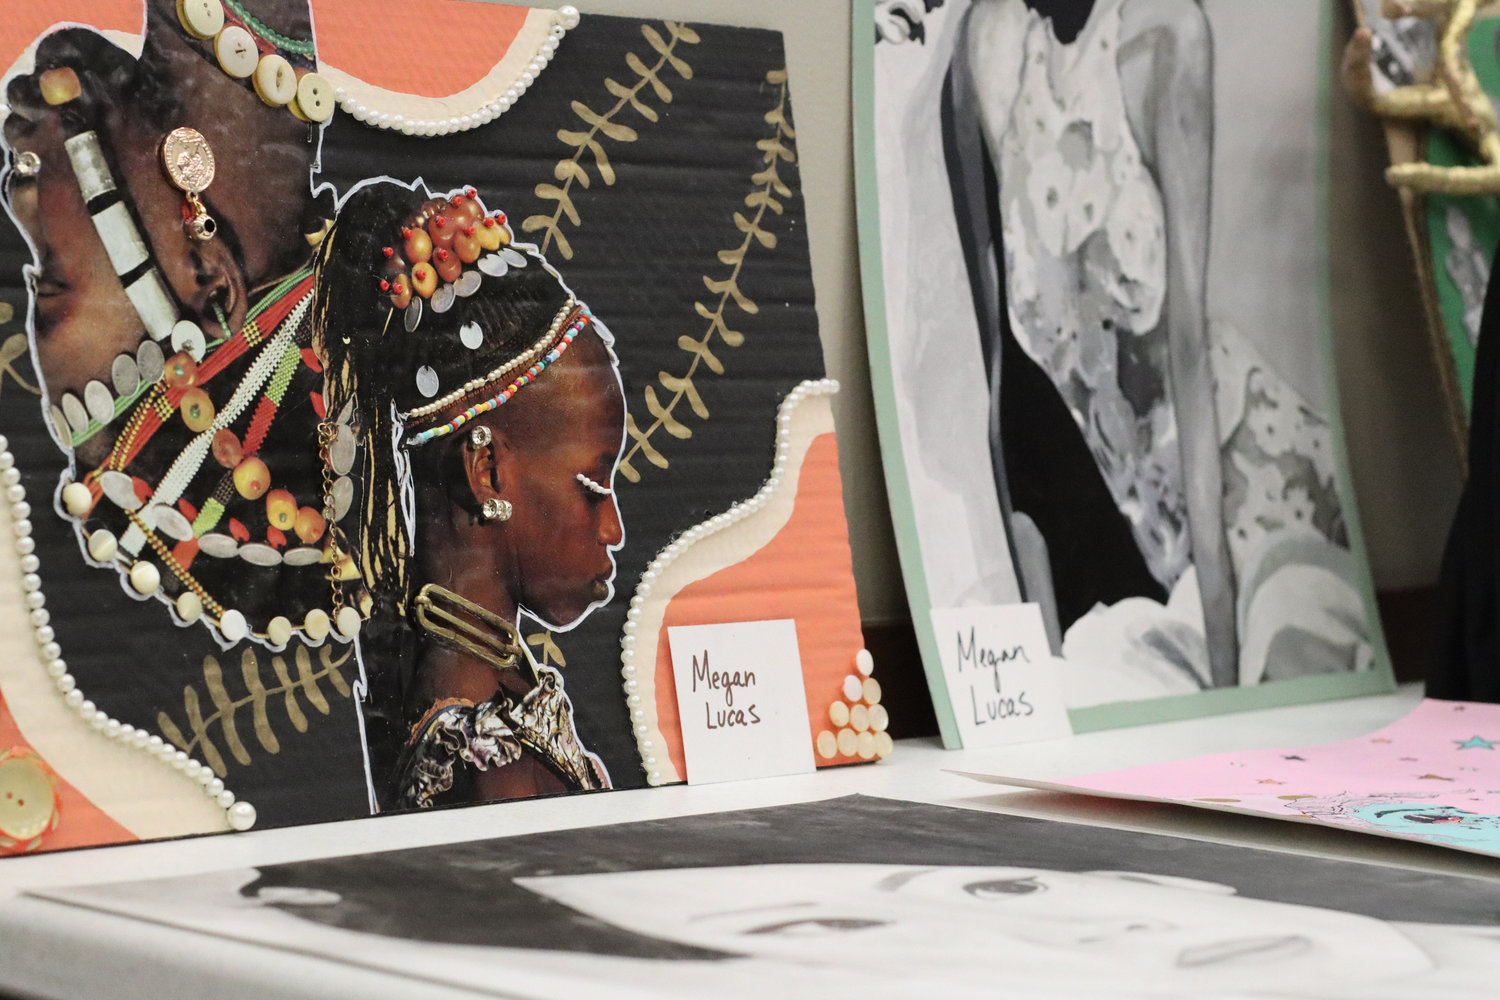 Mid-Prairie's first annual AK-12 art show was held April 11-13 at the Wellman YMCA.